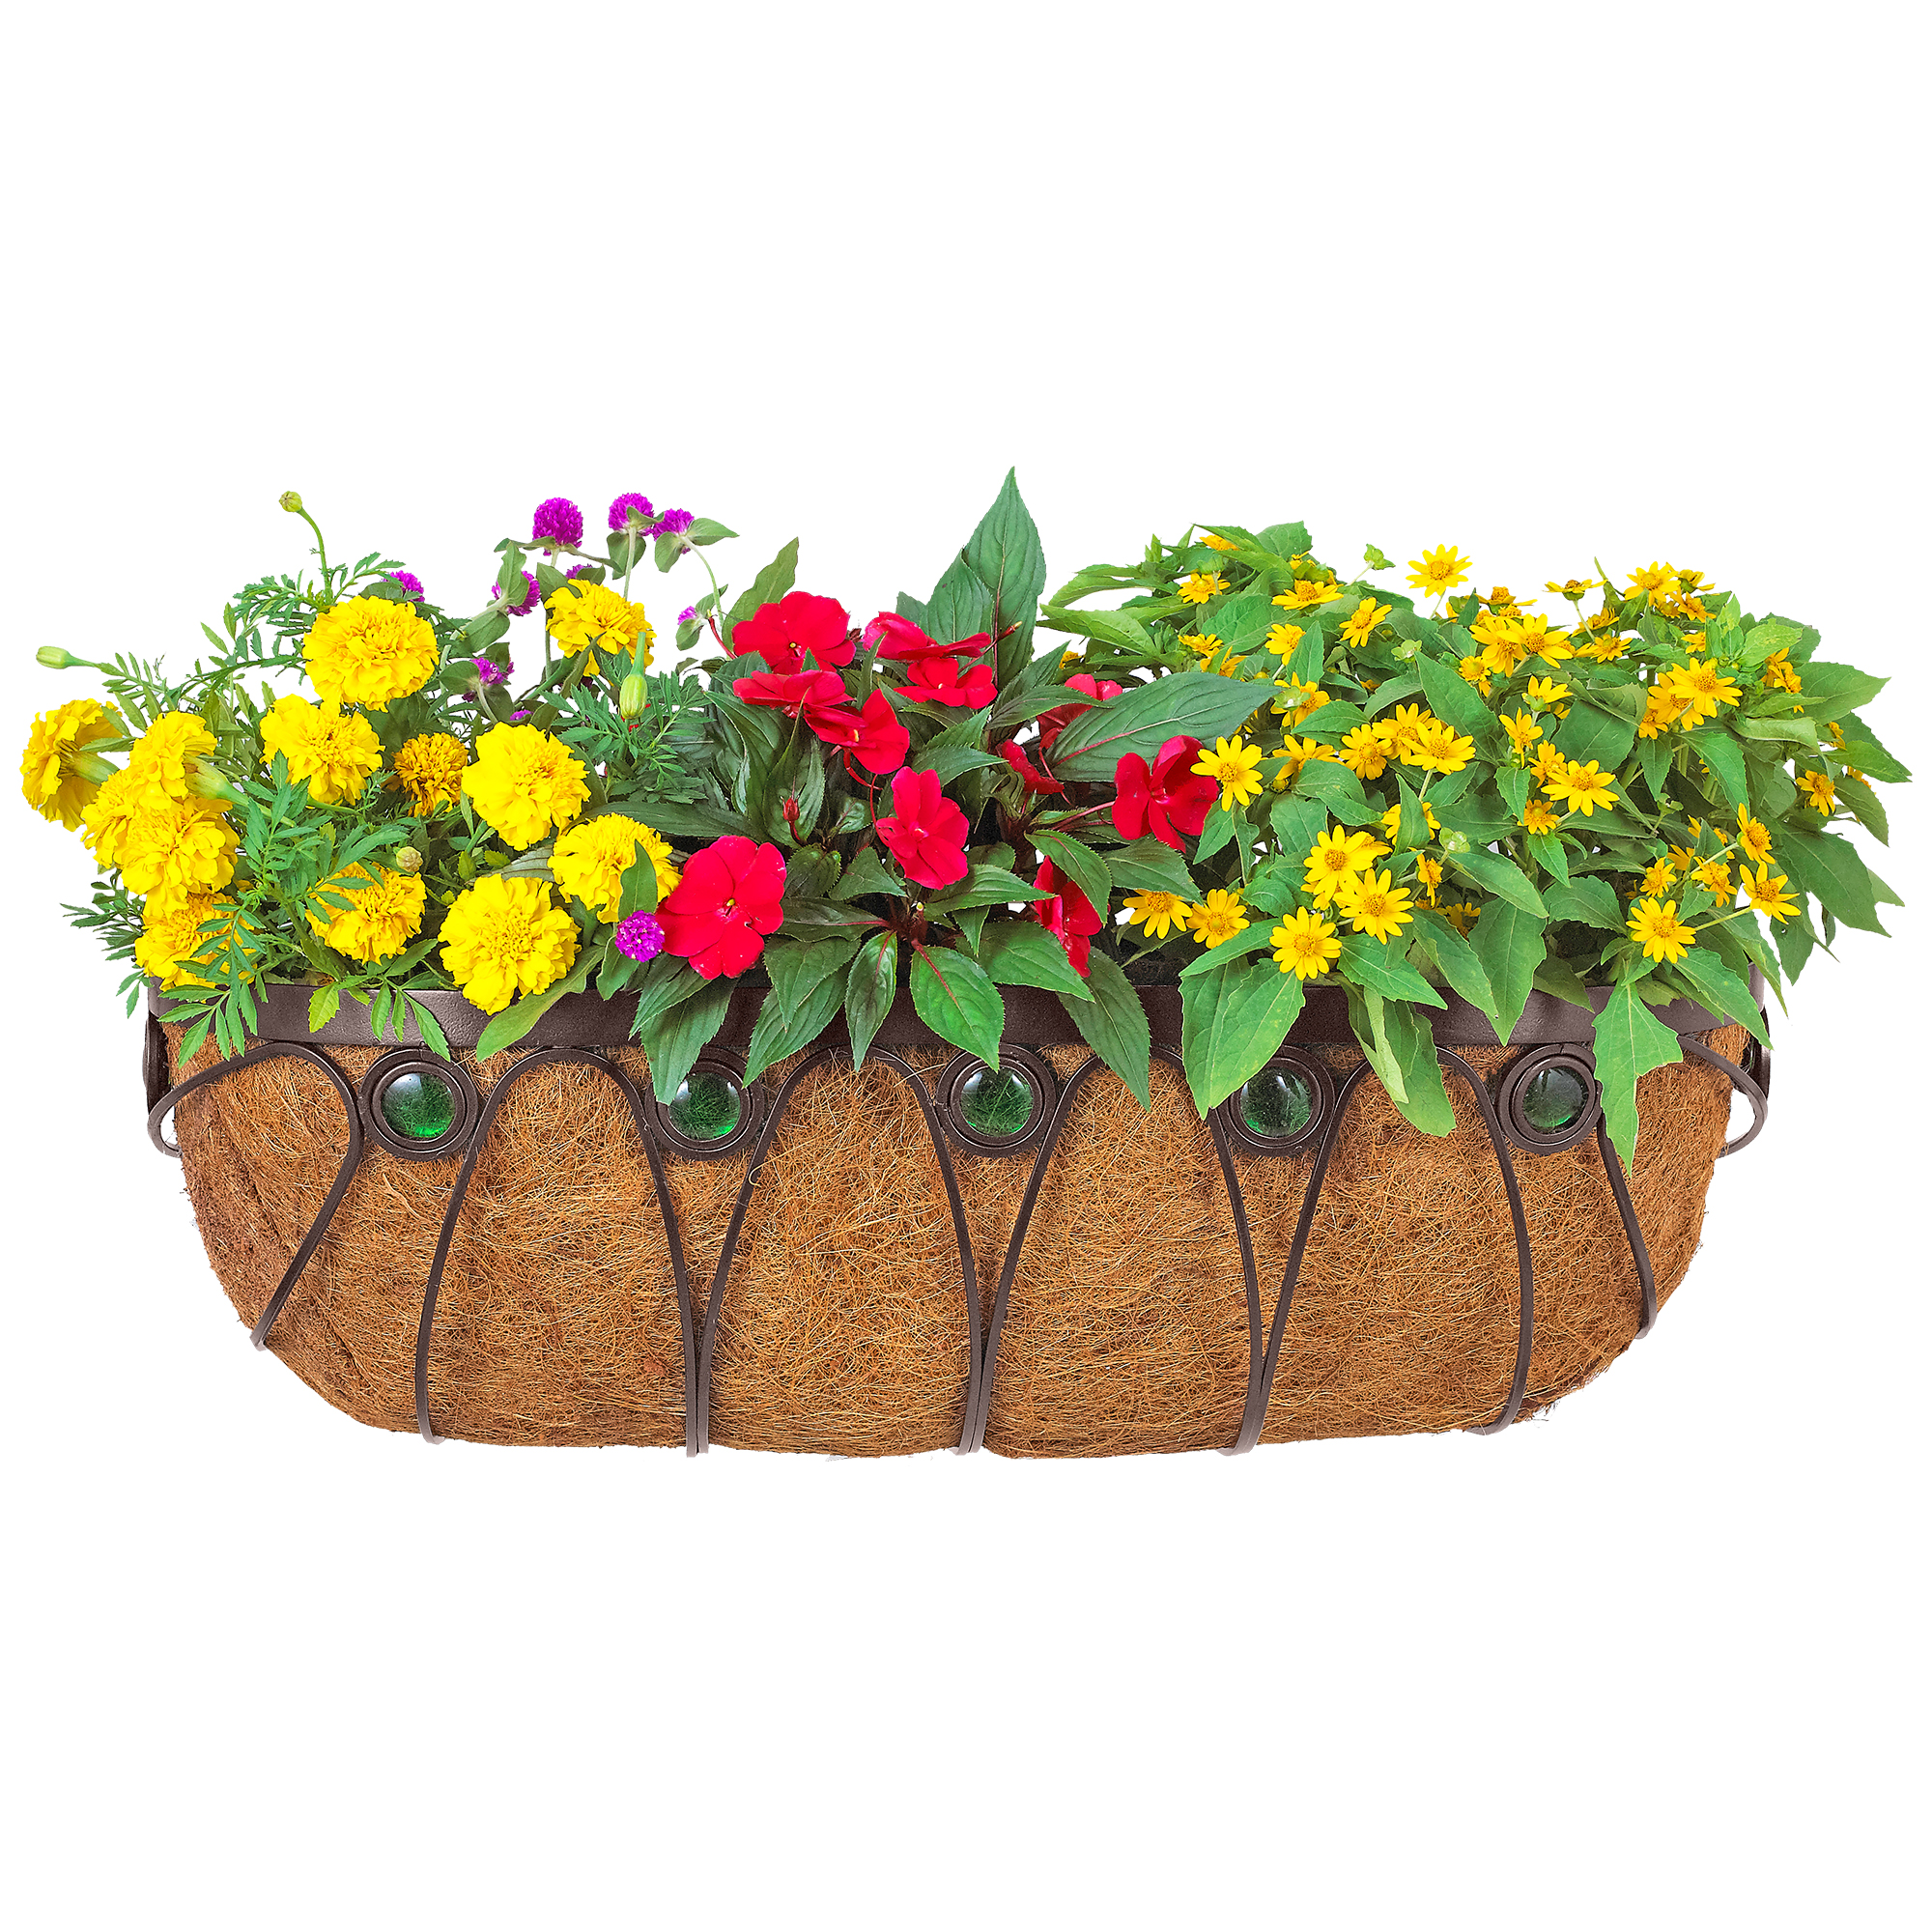 Arcadia Garden Products Emerald Series Metal Wall Planter - image 2 of 6